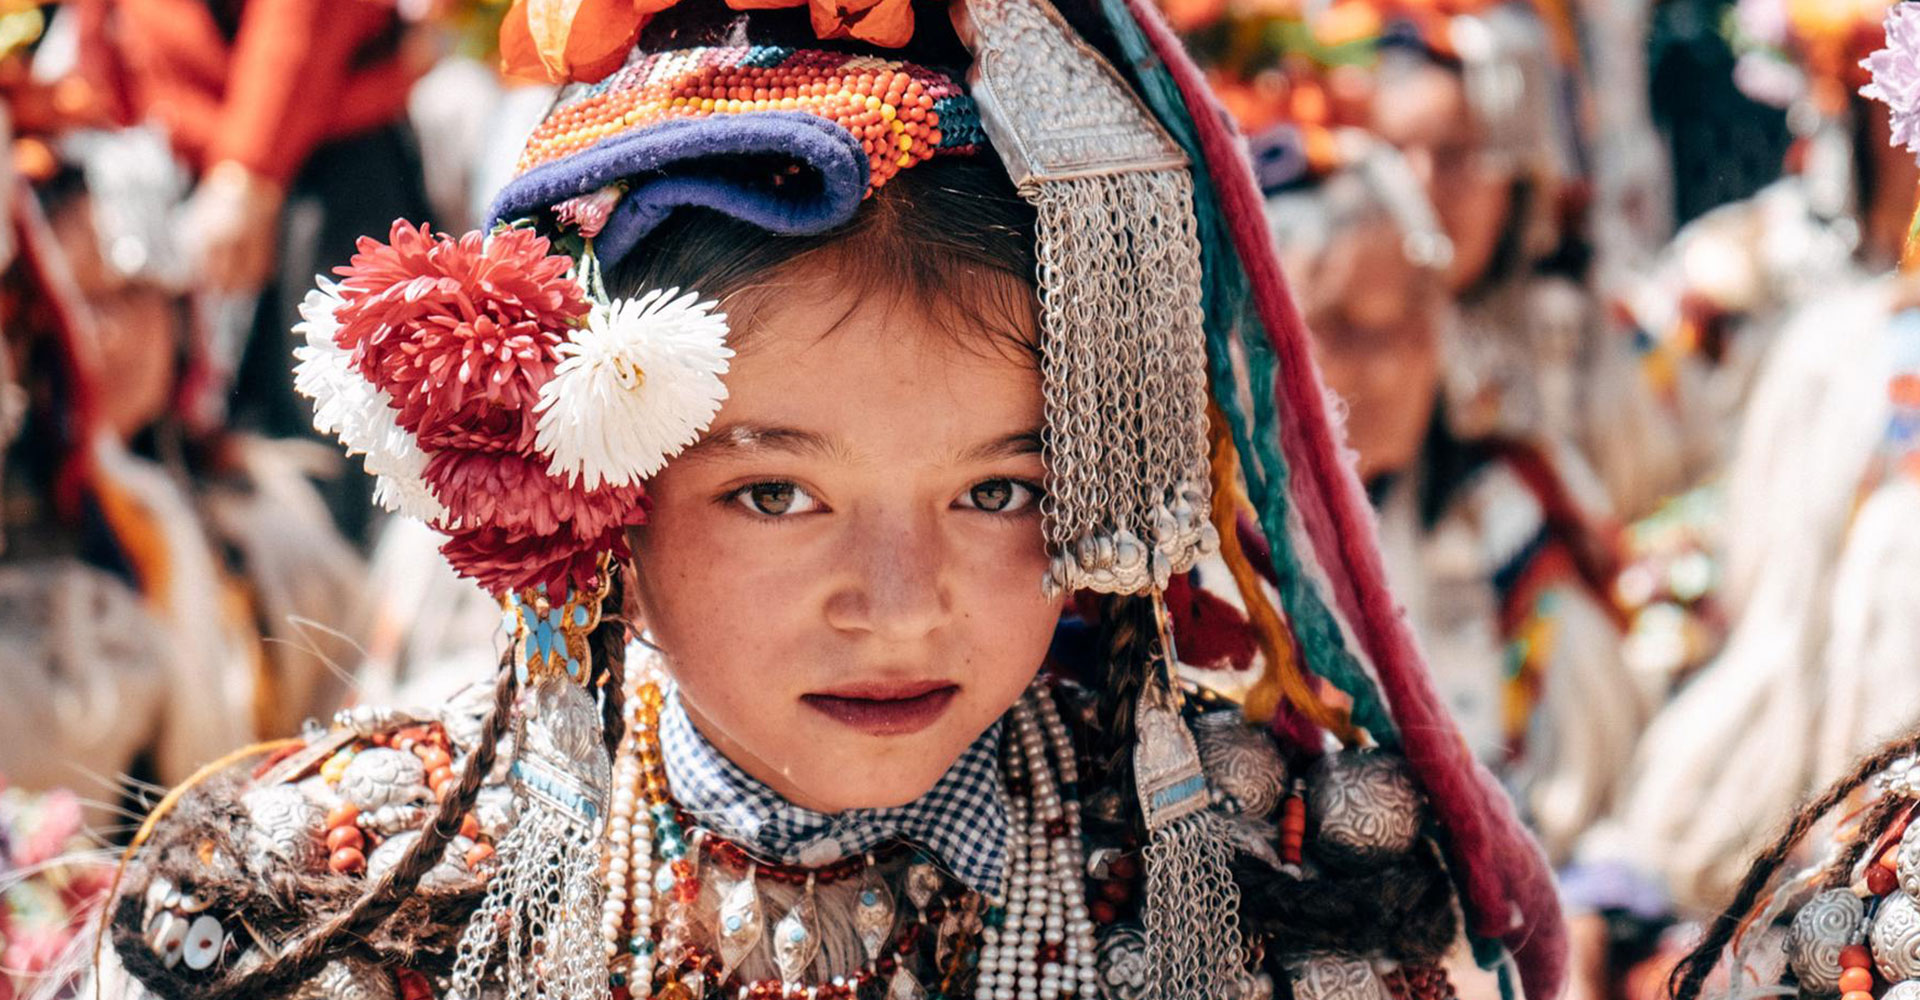 An Aryan girl in her hand made traditional dress and headpiece.